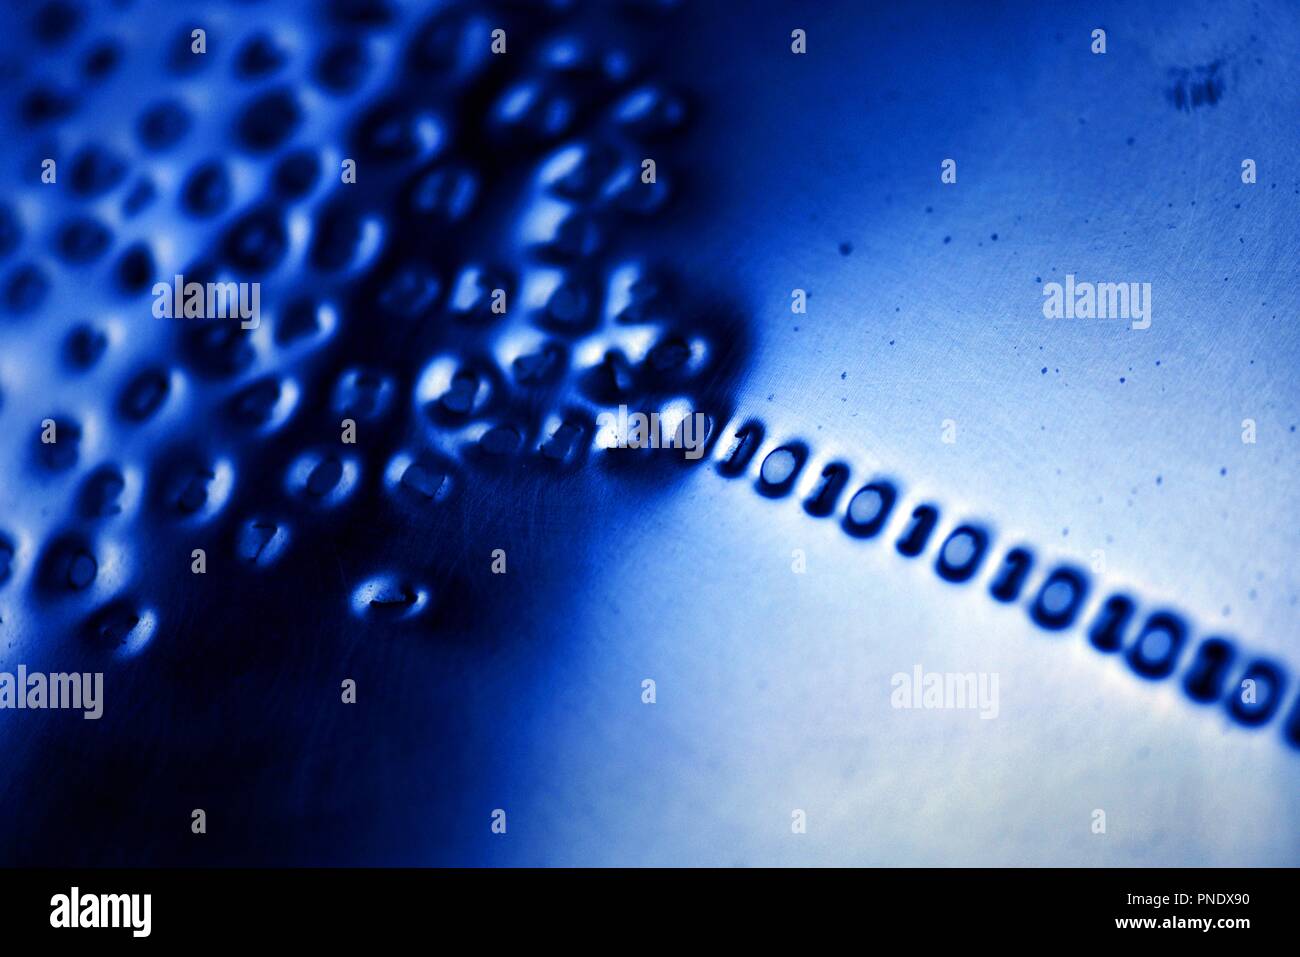 Binary code: digital language emerging from a numerical cloud Stock Photo